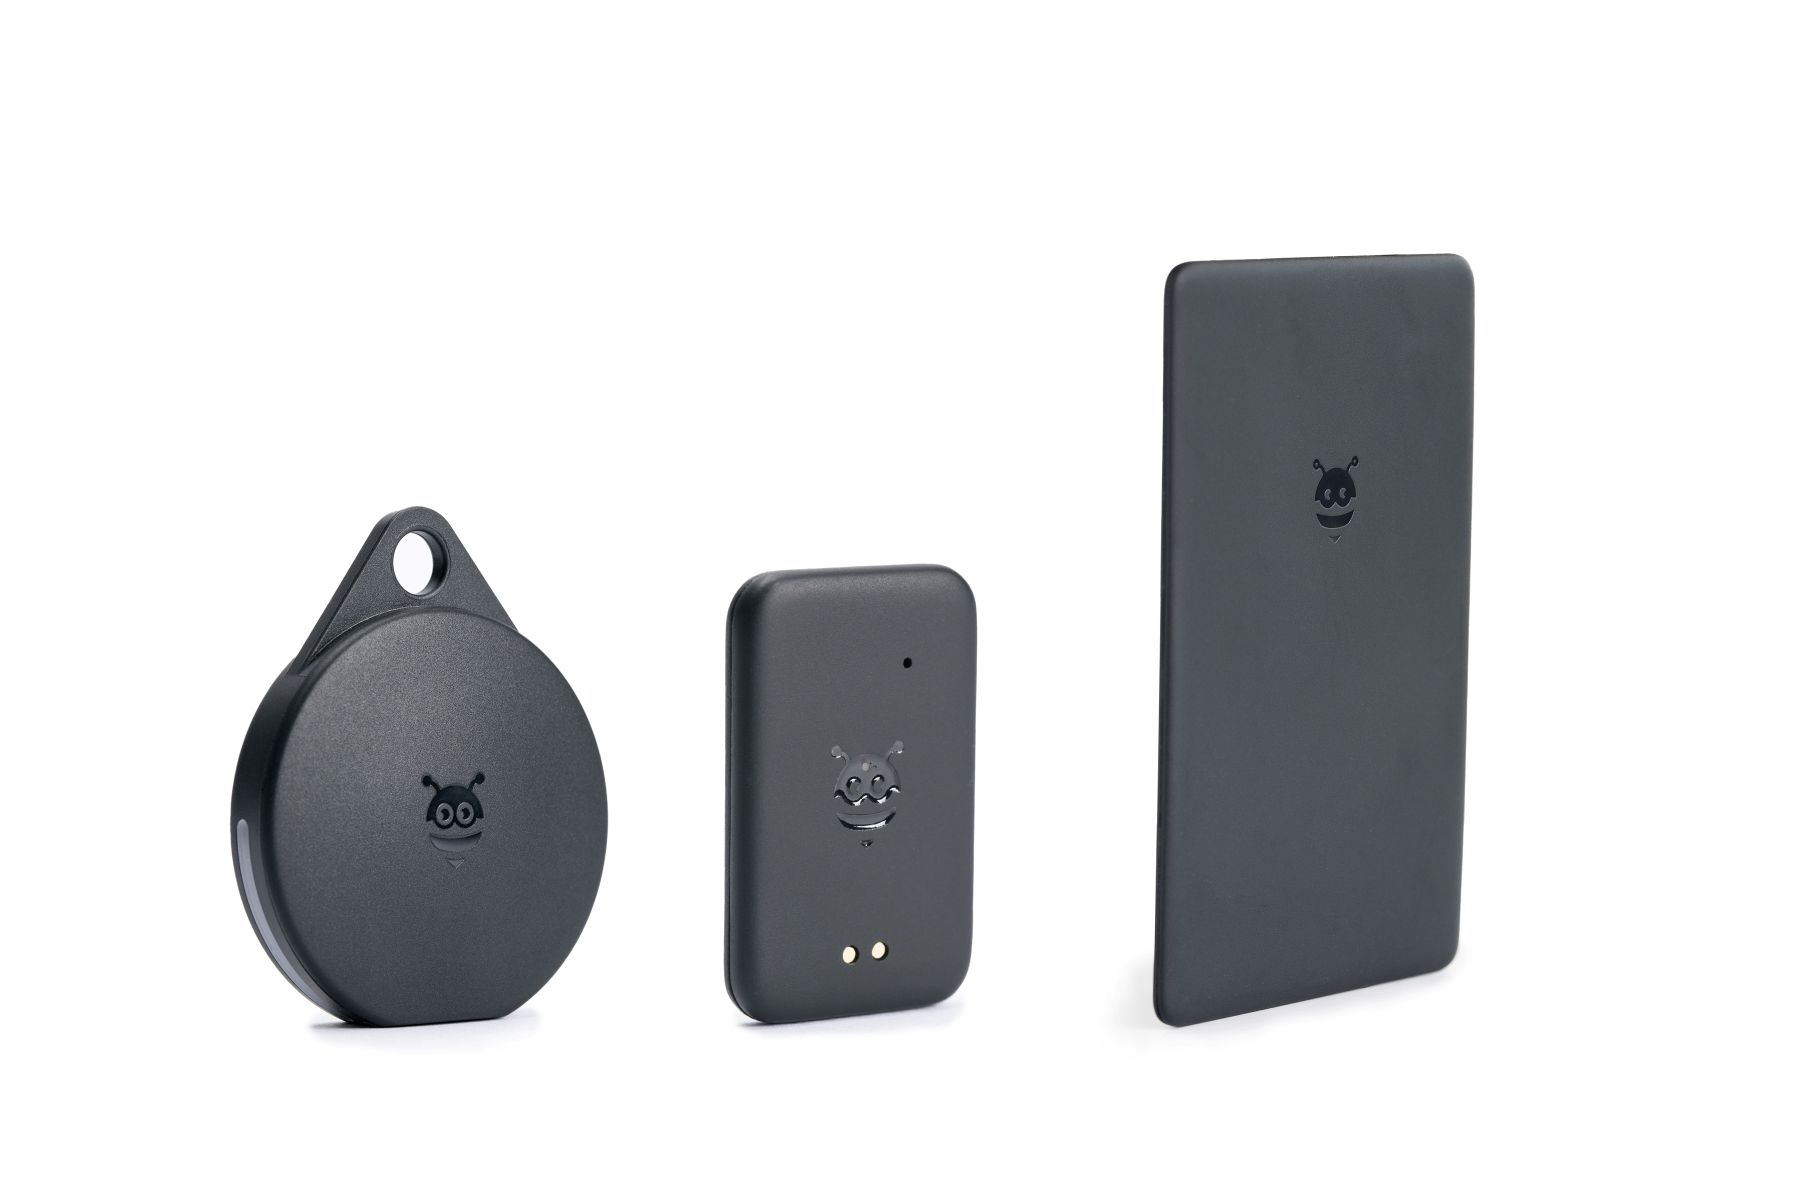 Pebblebee Unveils Trio of Products for Google’s “Find My Device” Ecosystem